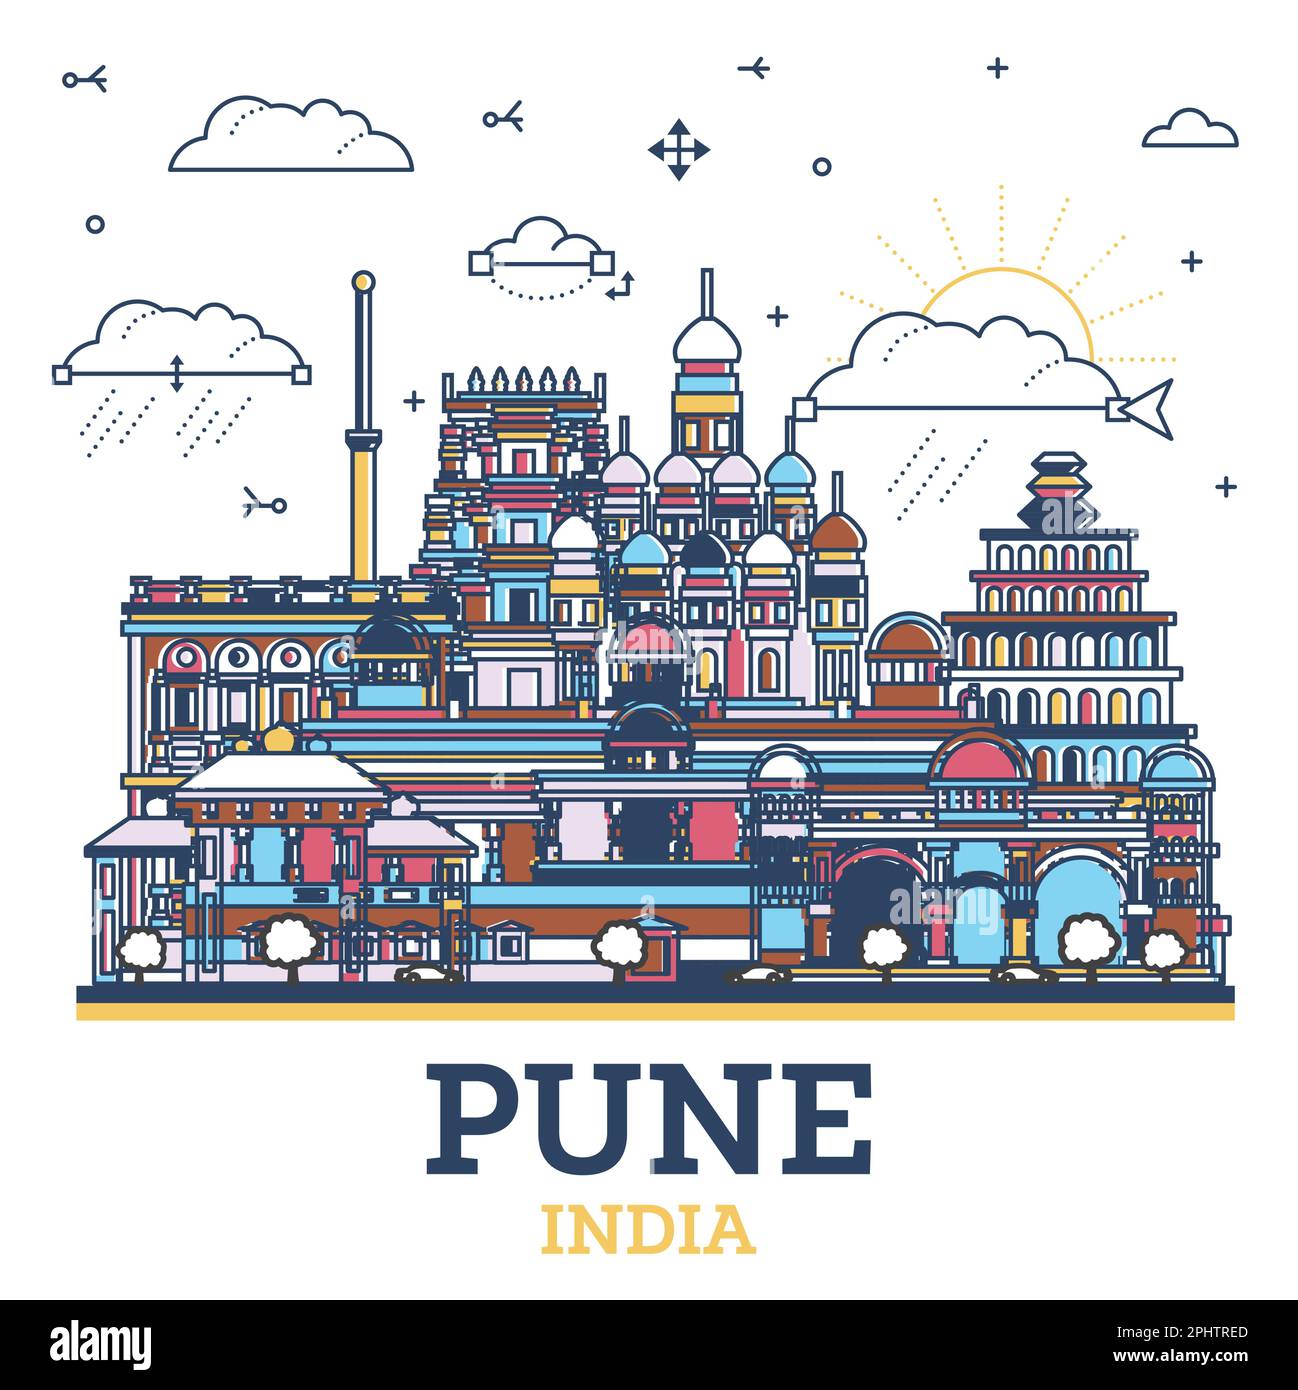 Outline Pune India City Skyline with Colored Historic Buildings Isolated on White. Vector Illustration. Pune Maharashtra Cityscape with Landmarks. Stock Vector